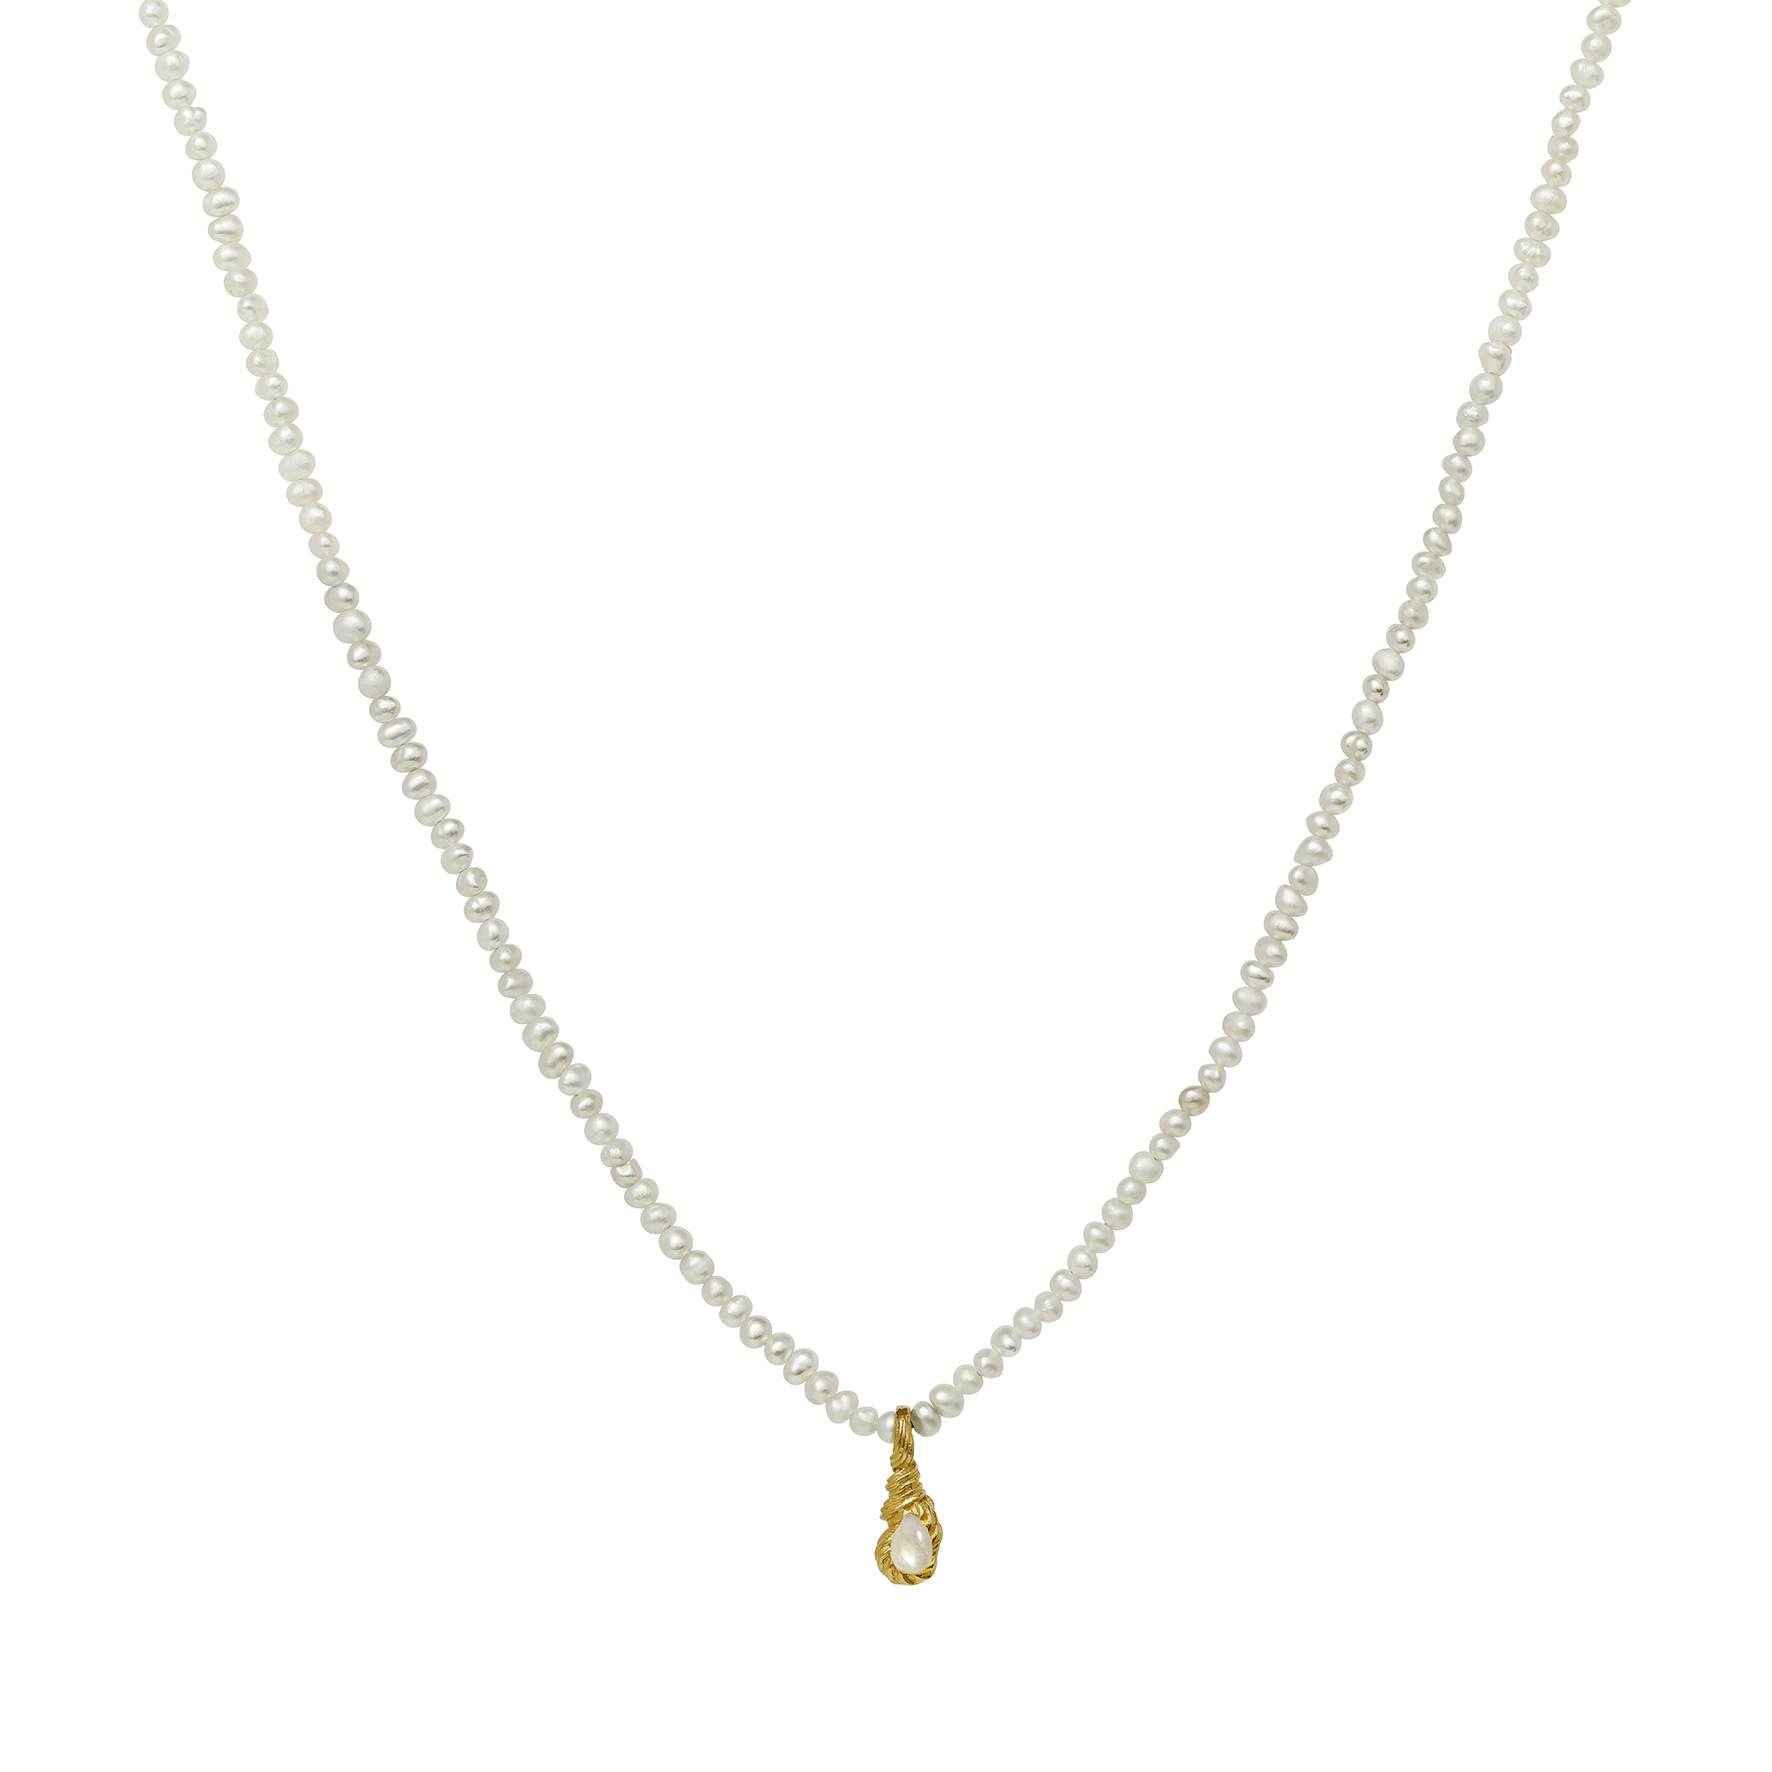 Aqua Necklace from Maanesten in Goldplated-Silver Sterling 925|Freshwater Pearl